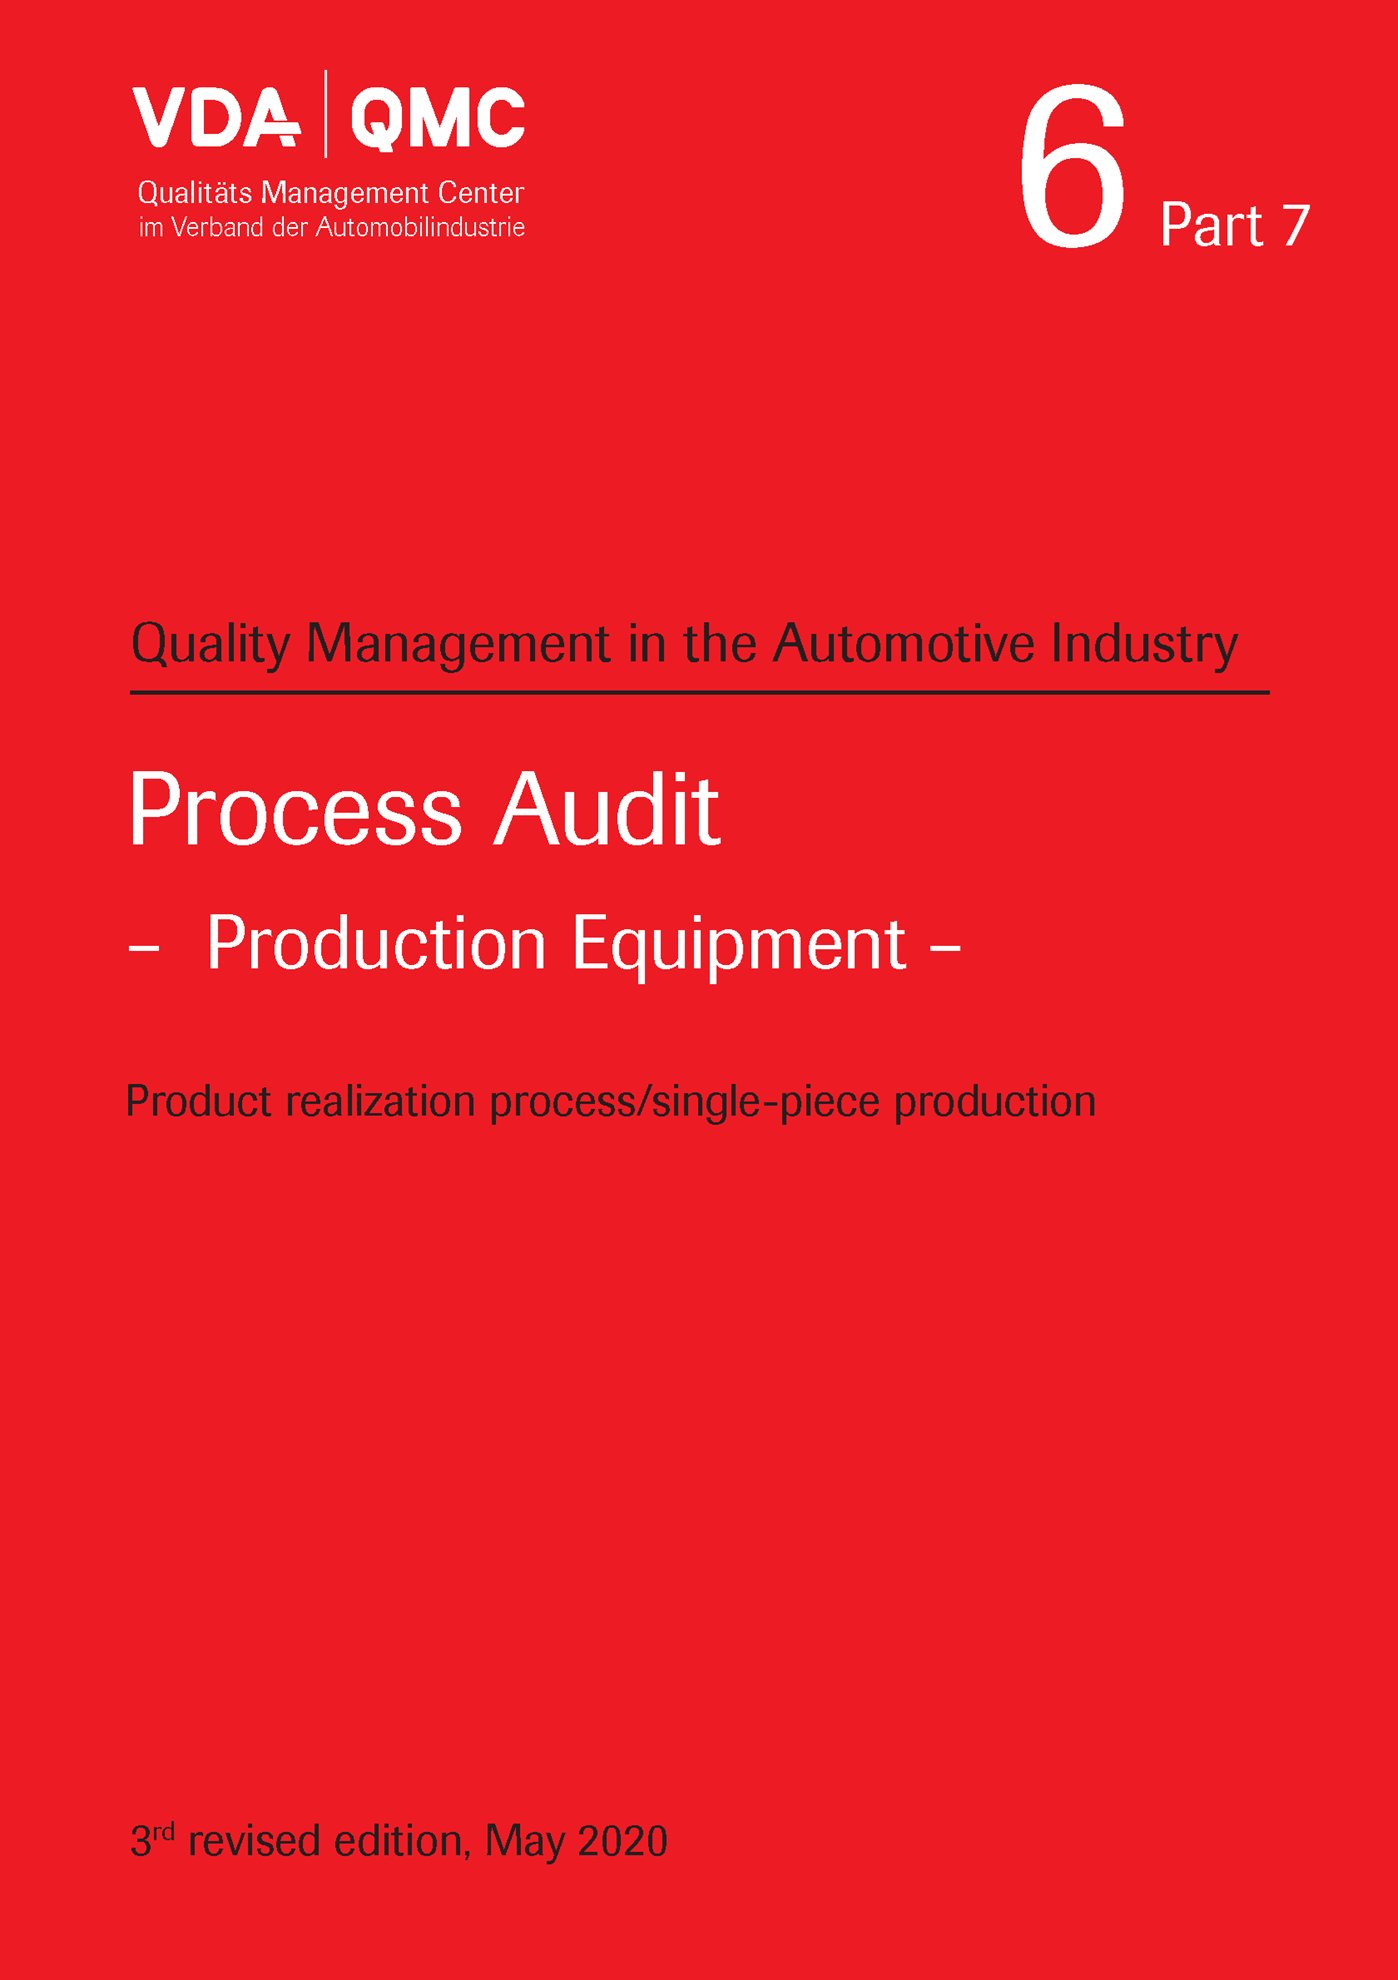 Publikace  VDA Volume 6 Part 7, Process Audit - Production Equipment, 3rd, revised edition, May 2020 1.5.2020 náhled